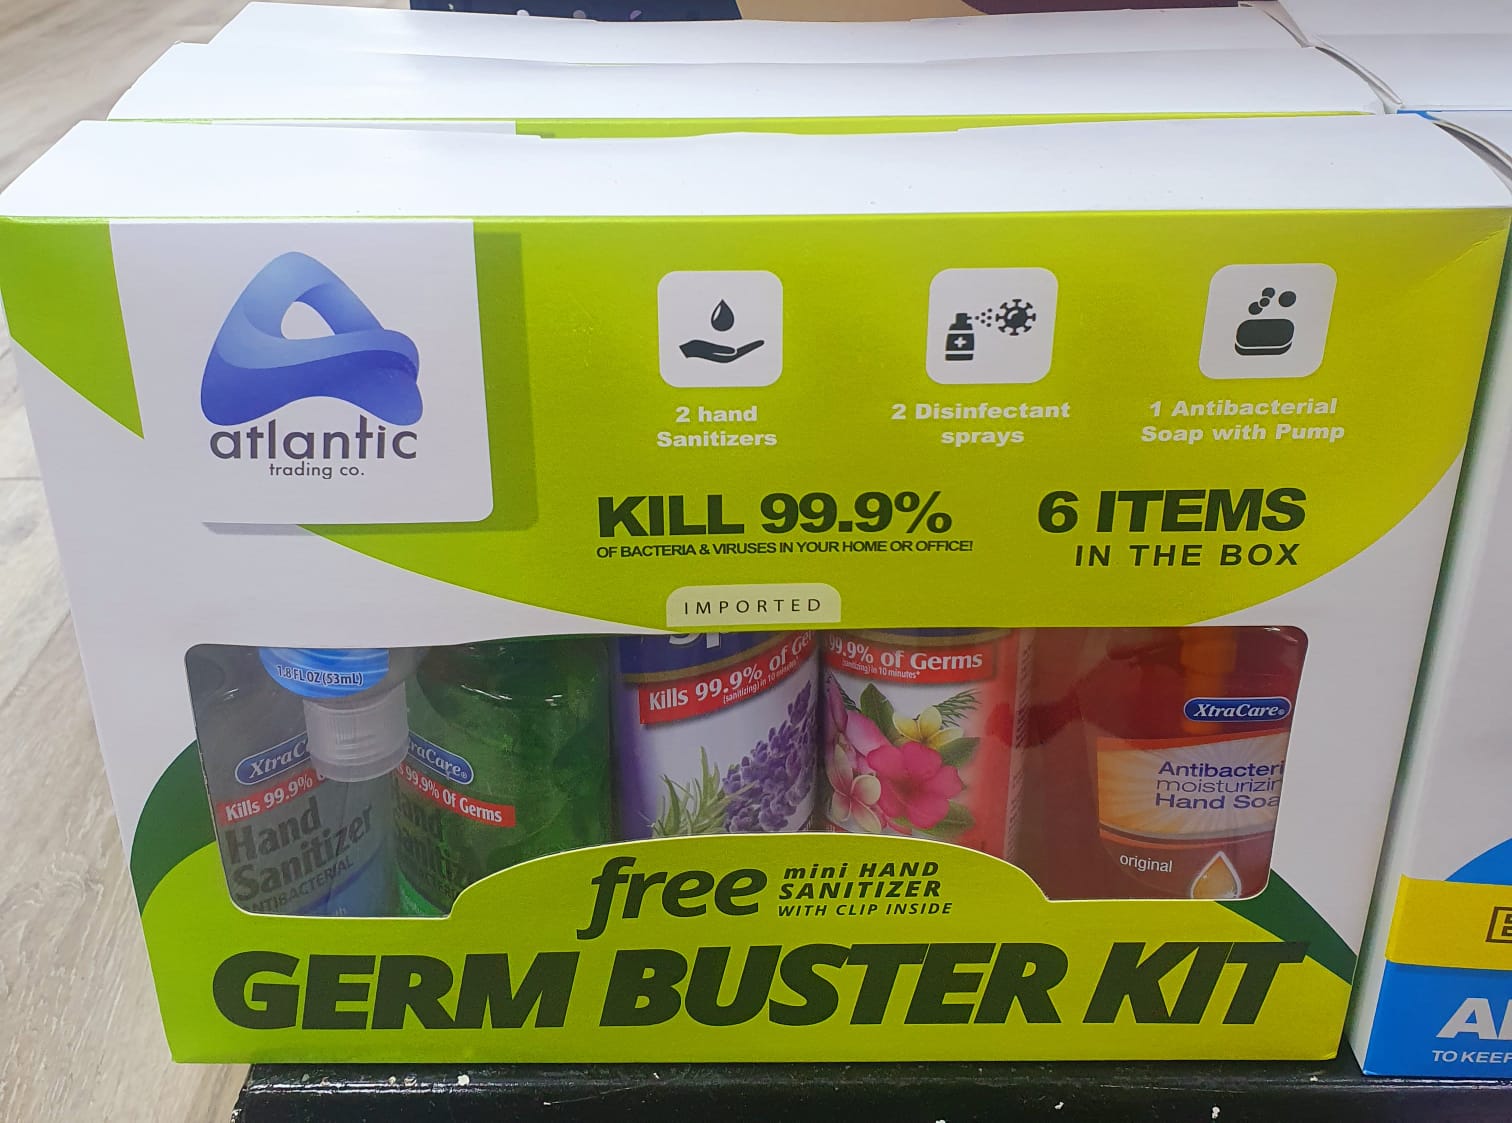 GERM BUSTER KIT